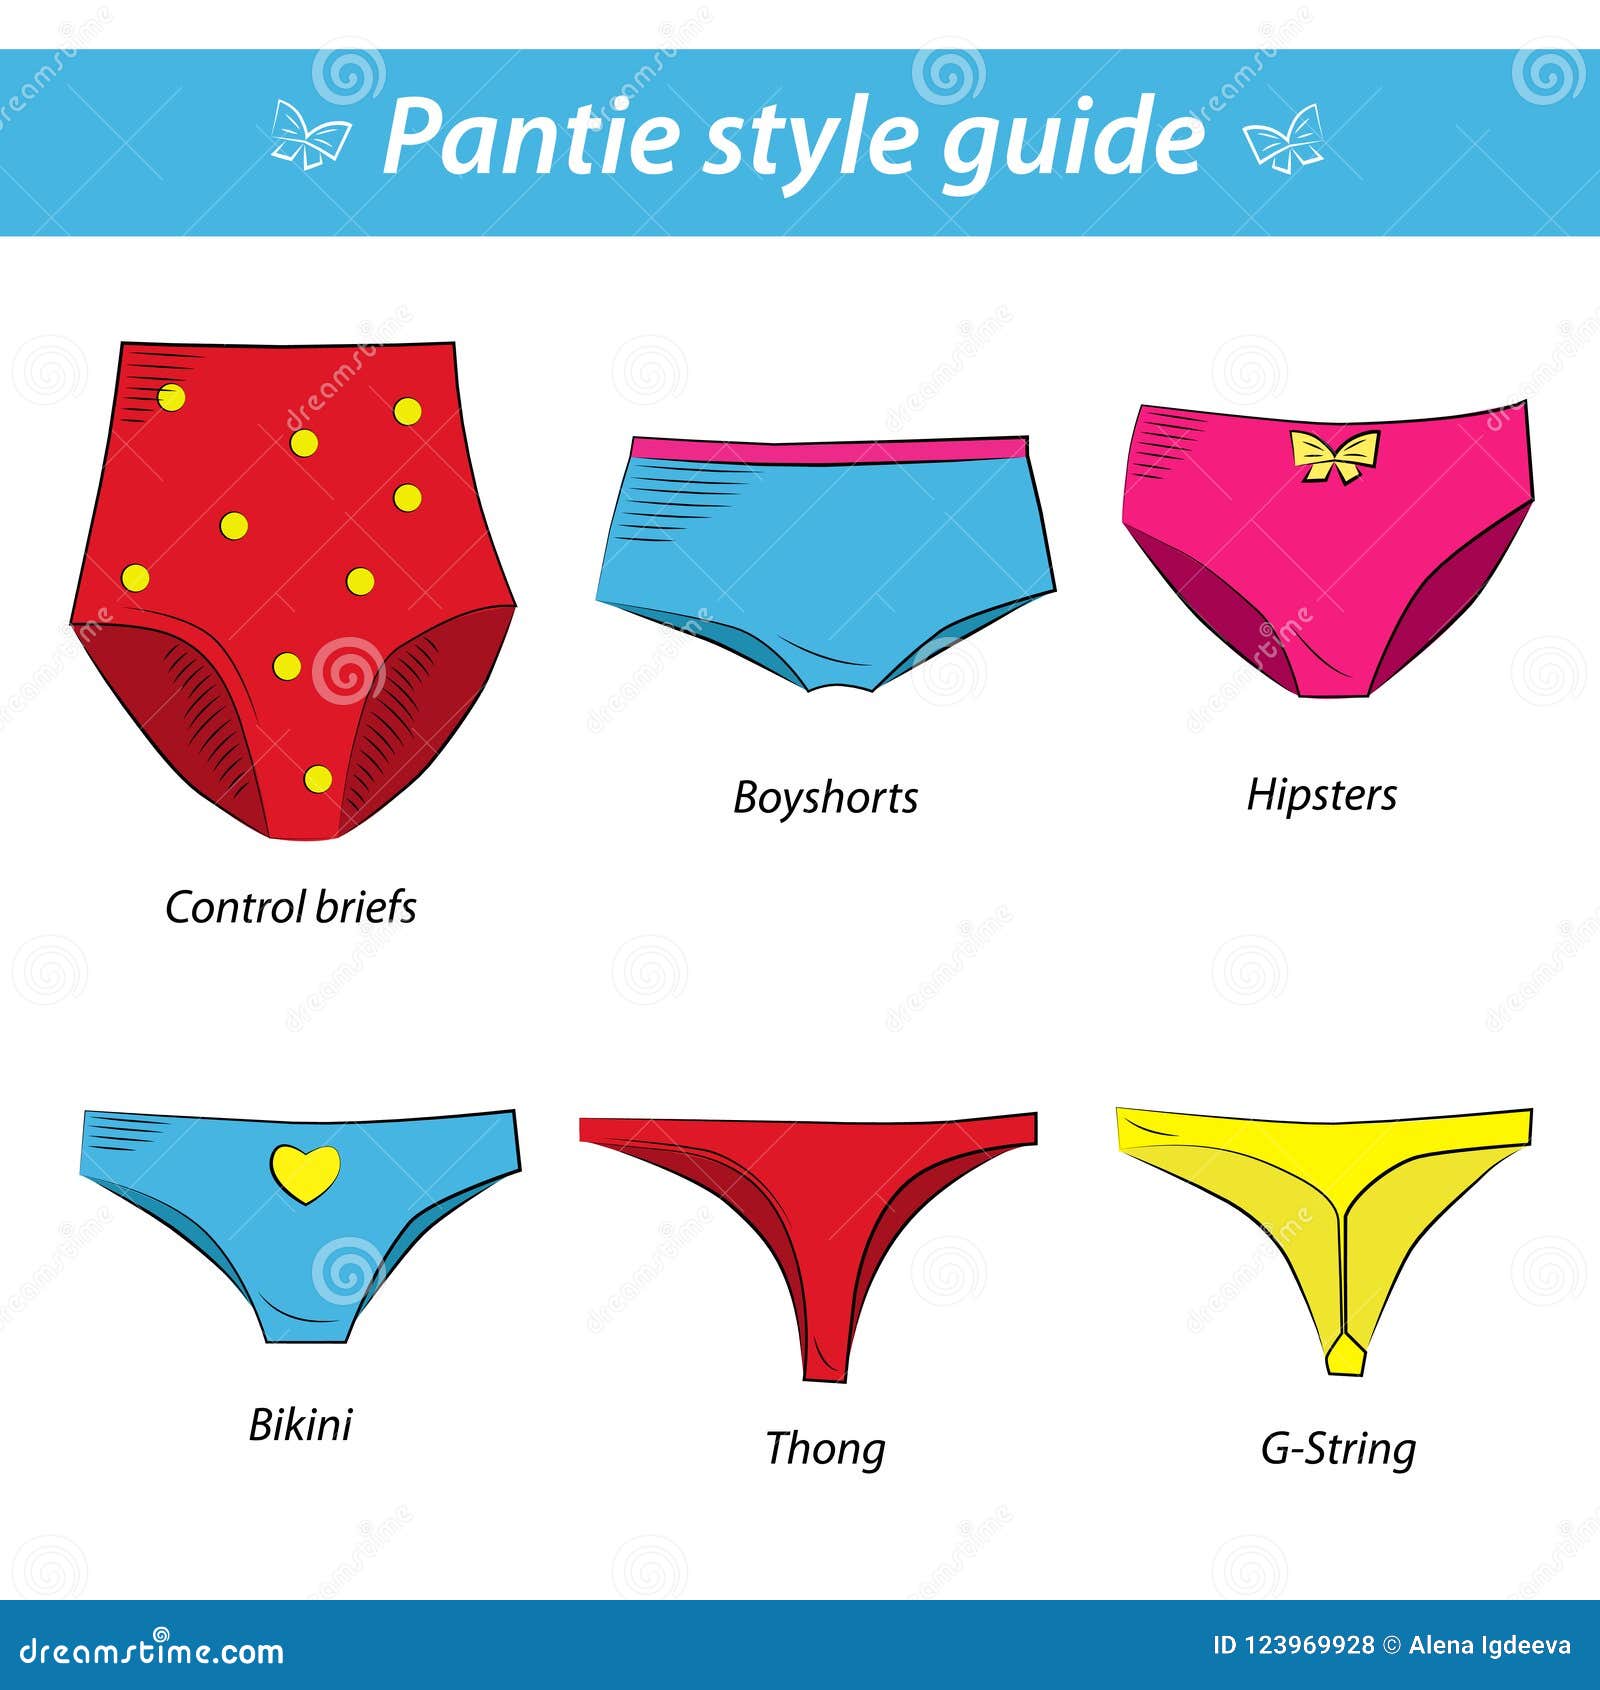 https://thumbs.dreamstime.com/z/vector-illustration-pantie-style-guide-control-brief-boyshorts-hipsters-bikini-thong-g-string-colored-panties-over-white-123969928.jpg